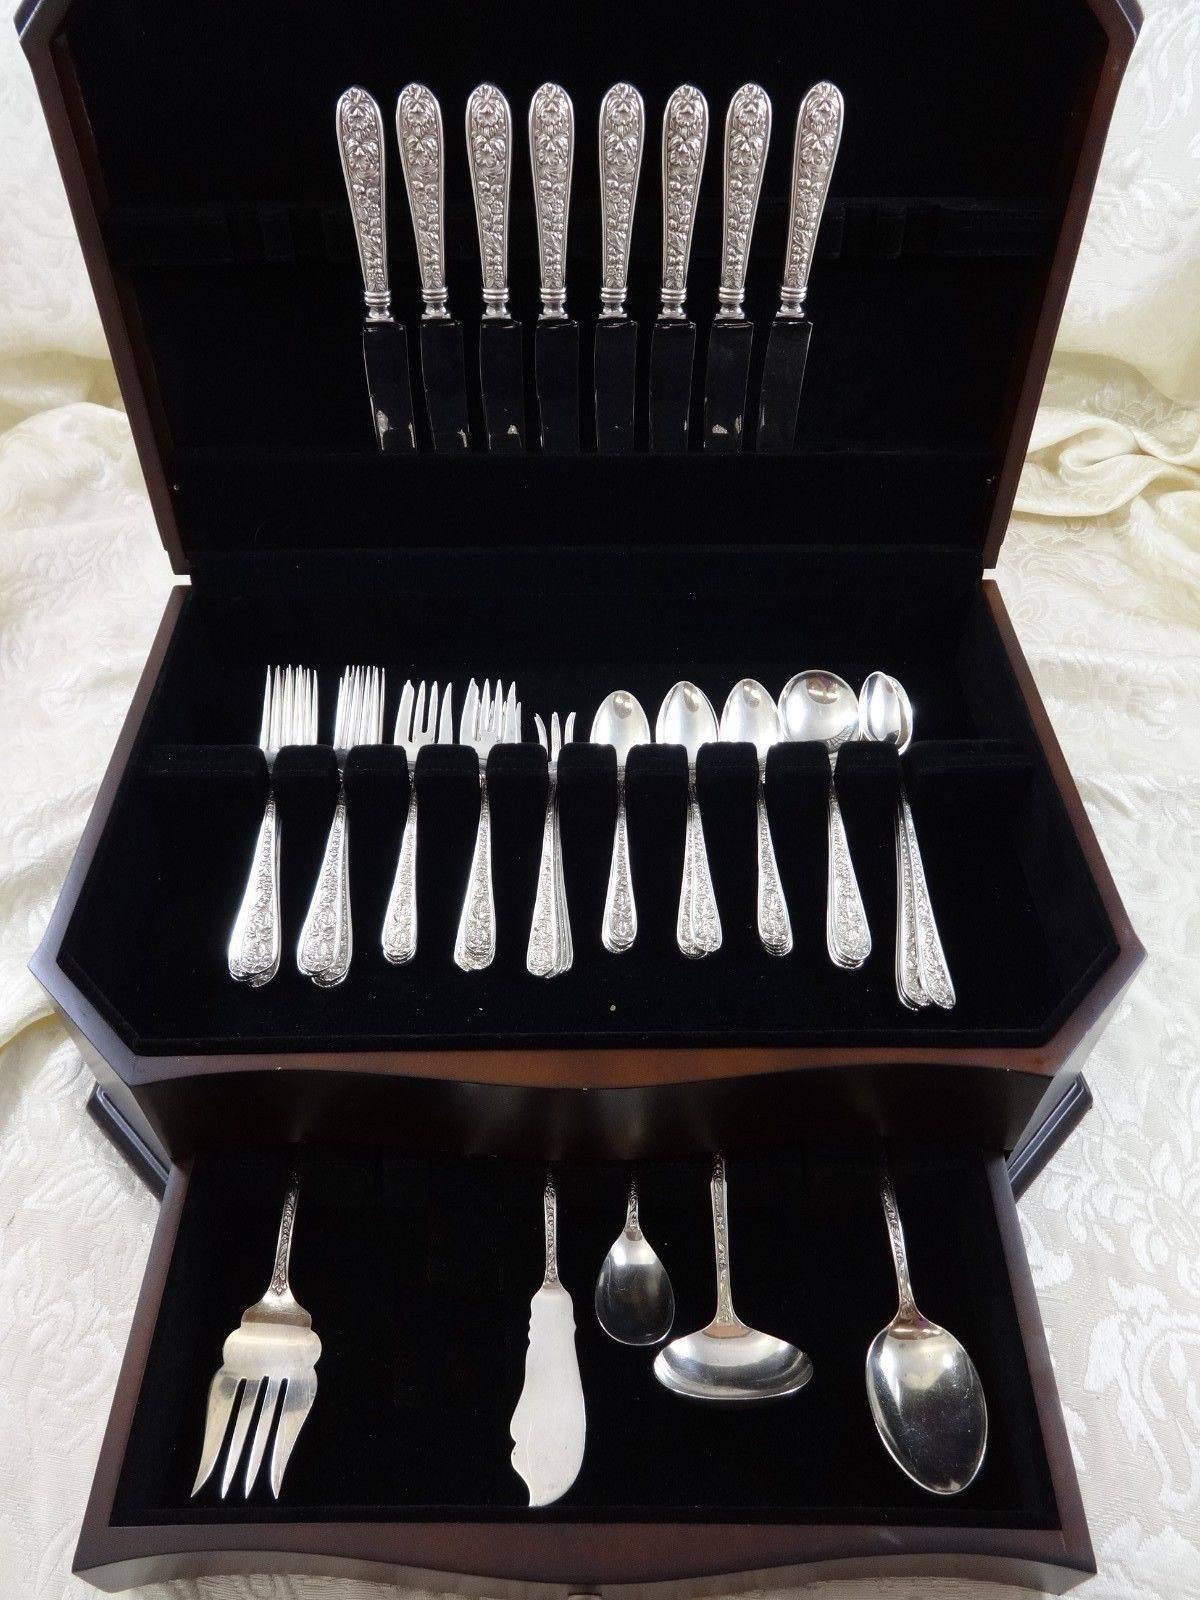 Beautiful Corsage by Stieff sterling silver flatware set of 69 pieces. This set includes:

Eight knives, 9